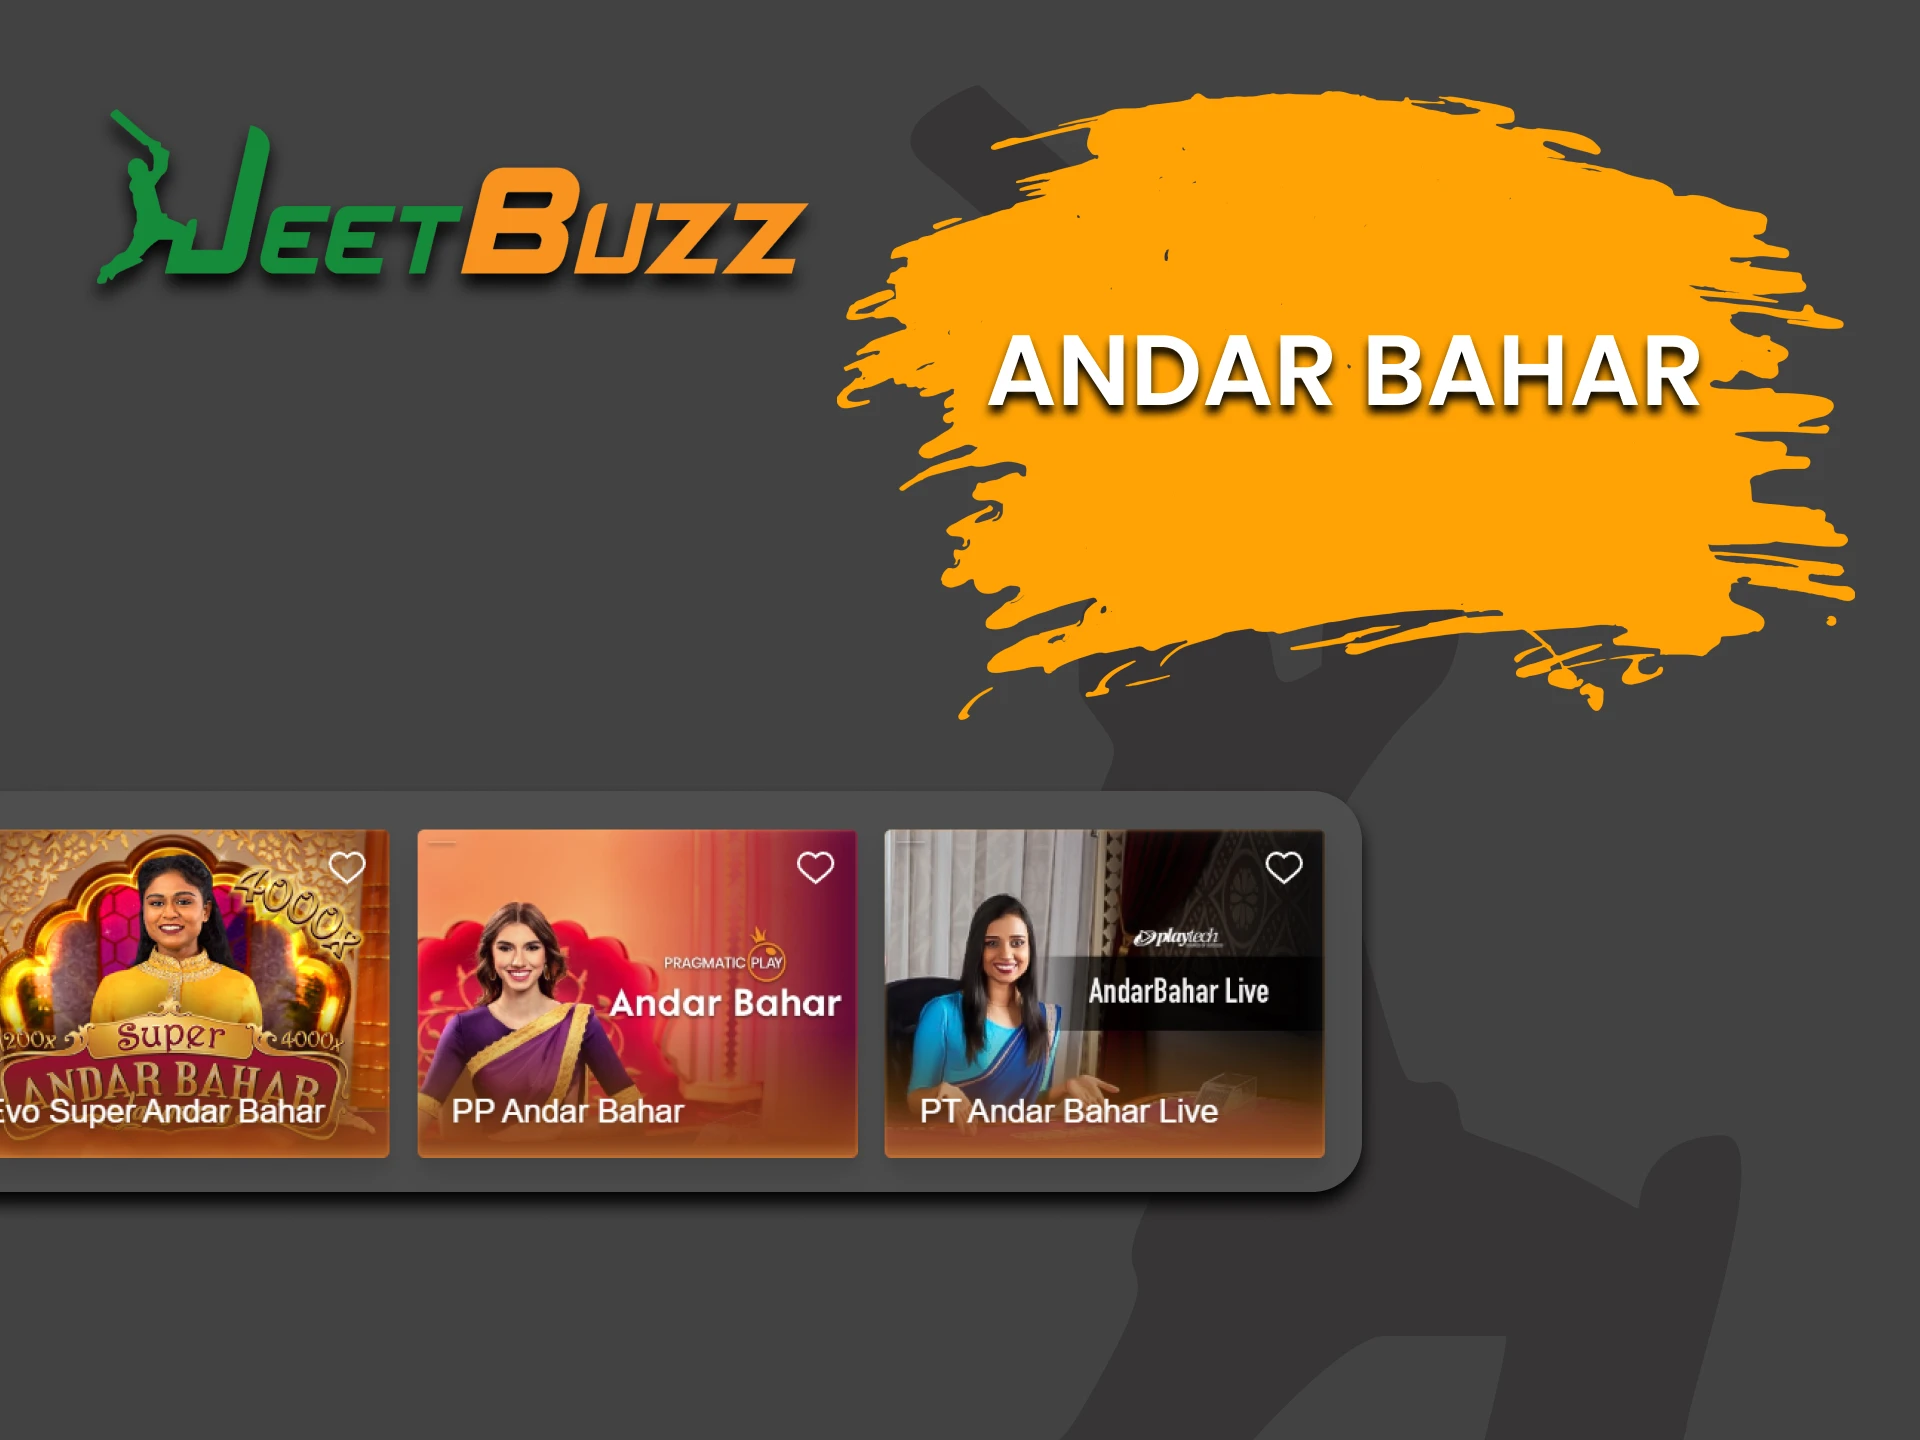 To play live casino on JettBuzz, choose Andar Bahar.